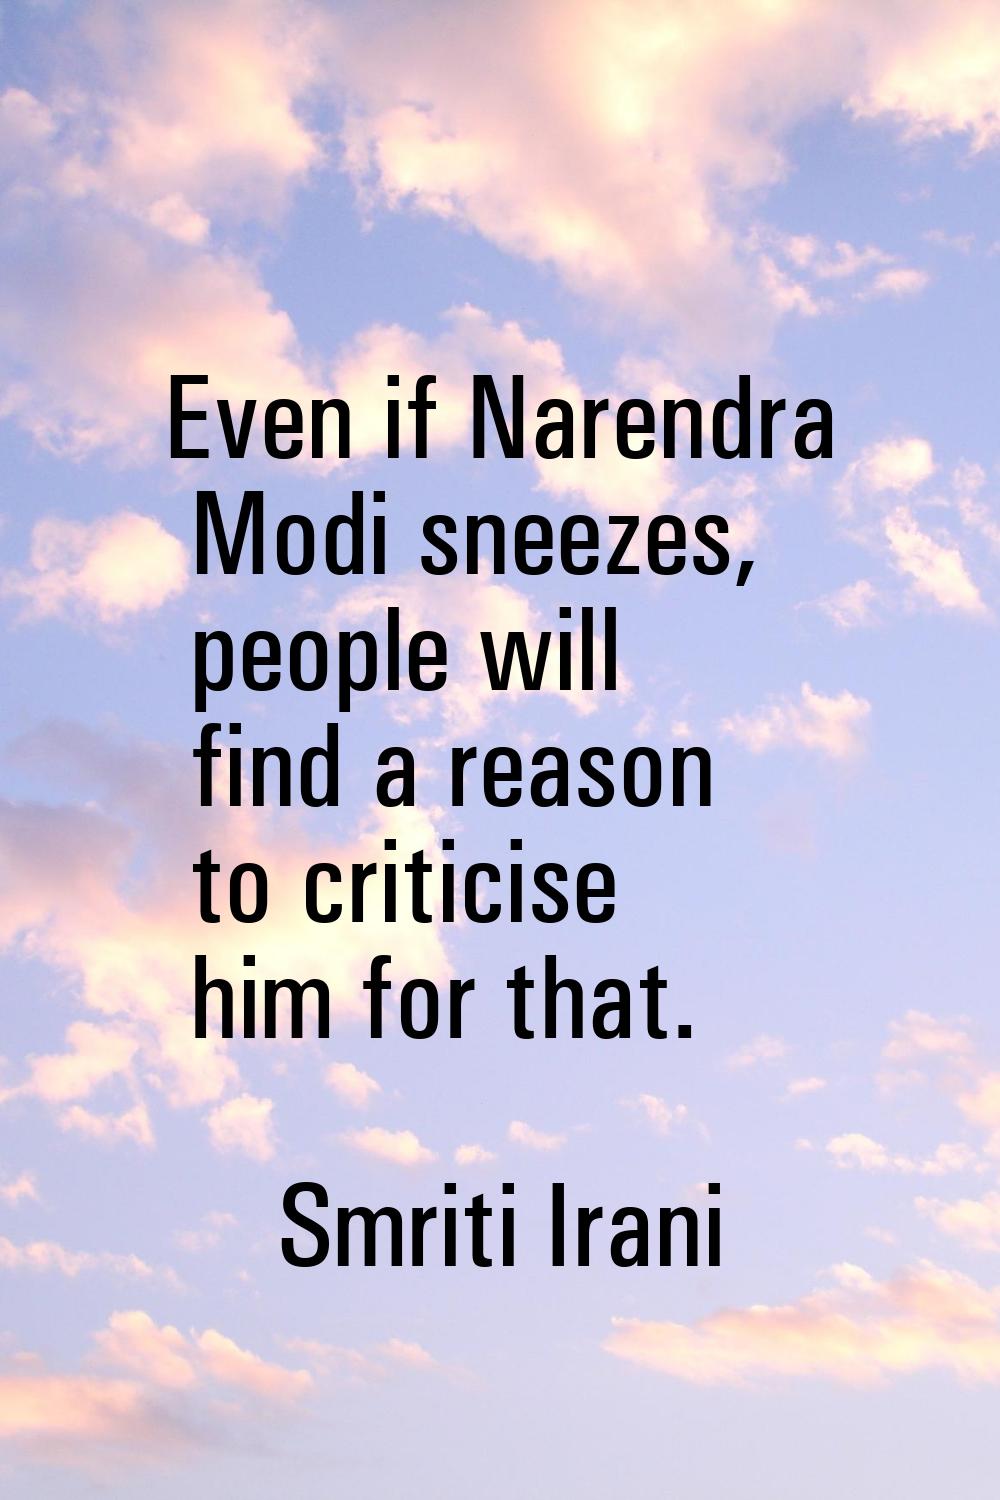 Even if Narendra Modi sneezes, people will find a reason to criticise him for that.